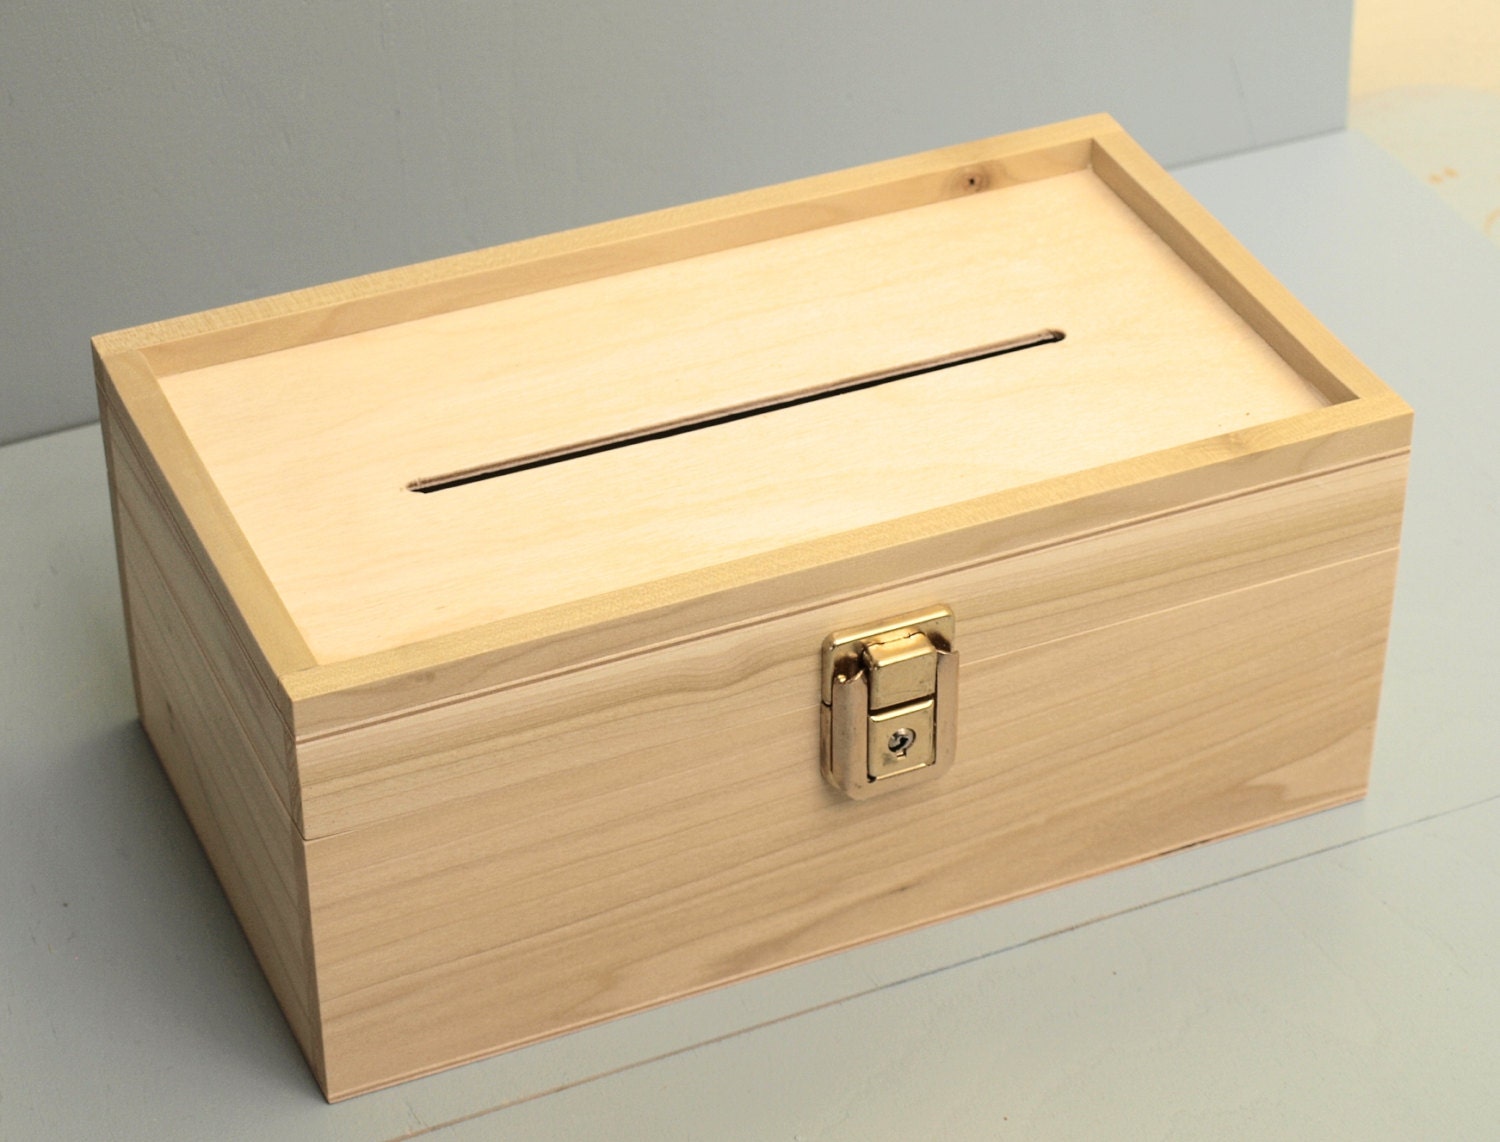 Suggestion Box Reclaimed Wood with Slot Key and Lock Hinged